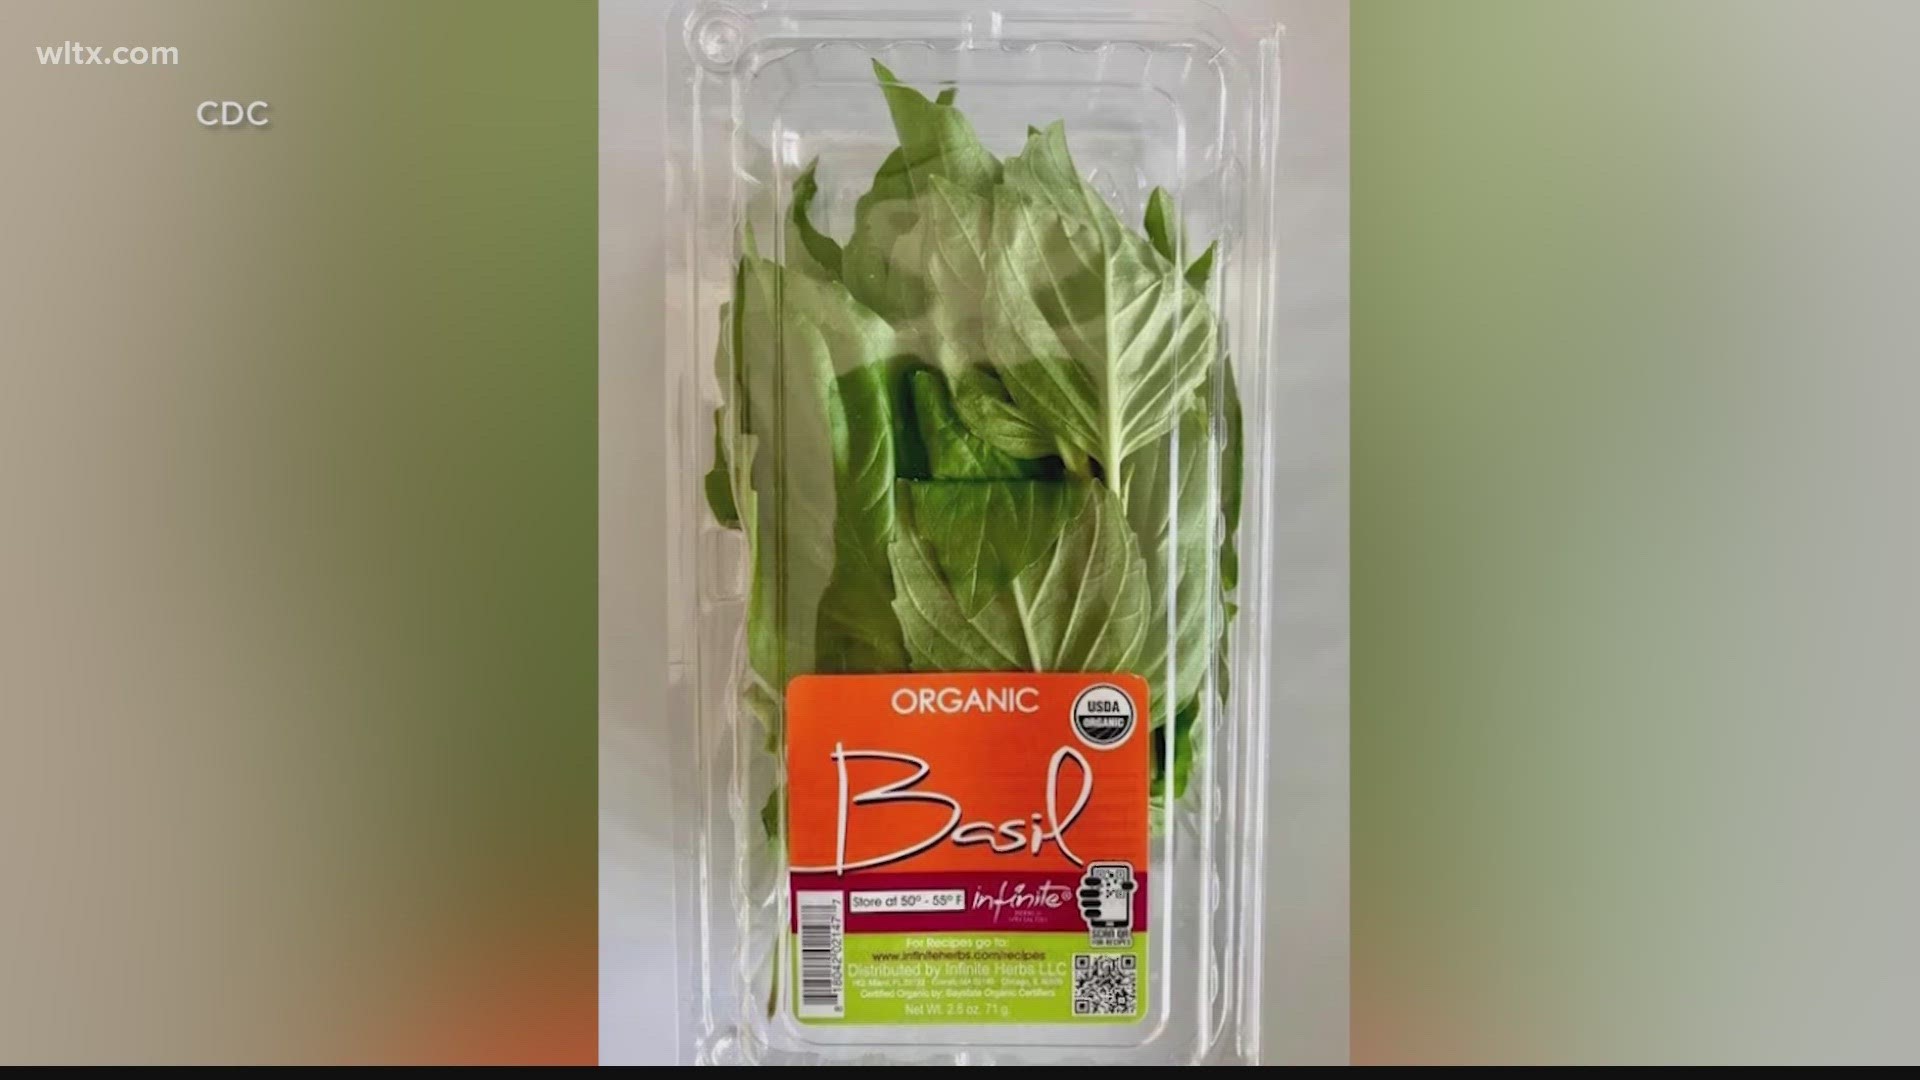 The infinite herbs branded basil is coming off the shelves after a salmonella outbreak in 29 states including SC.